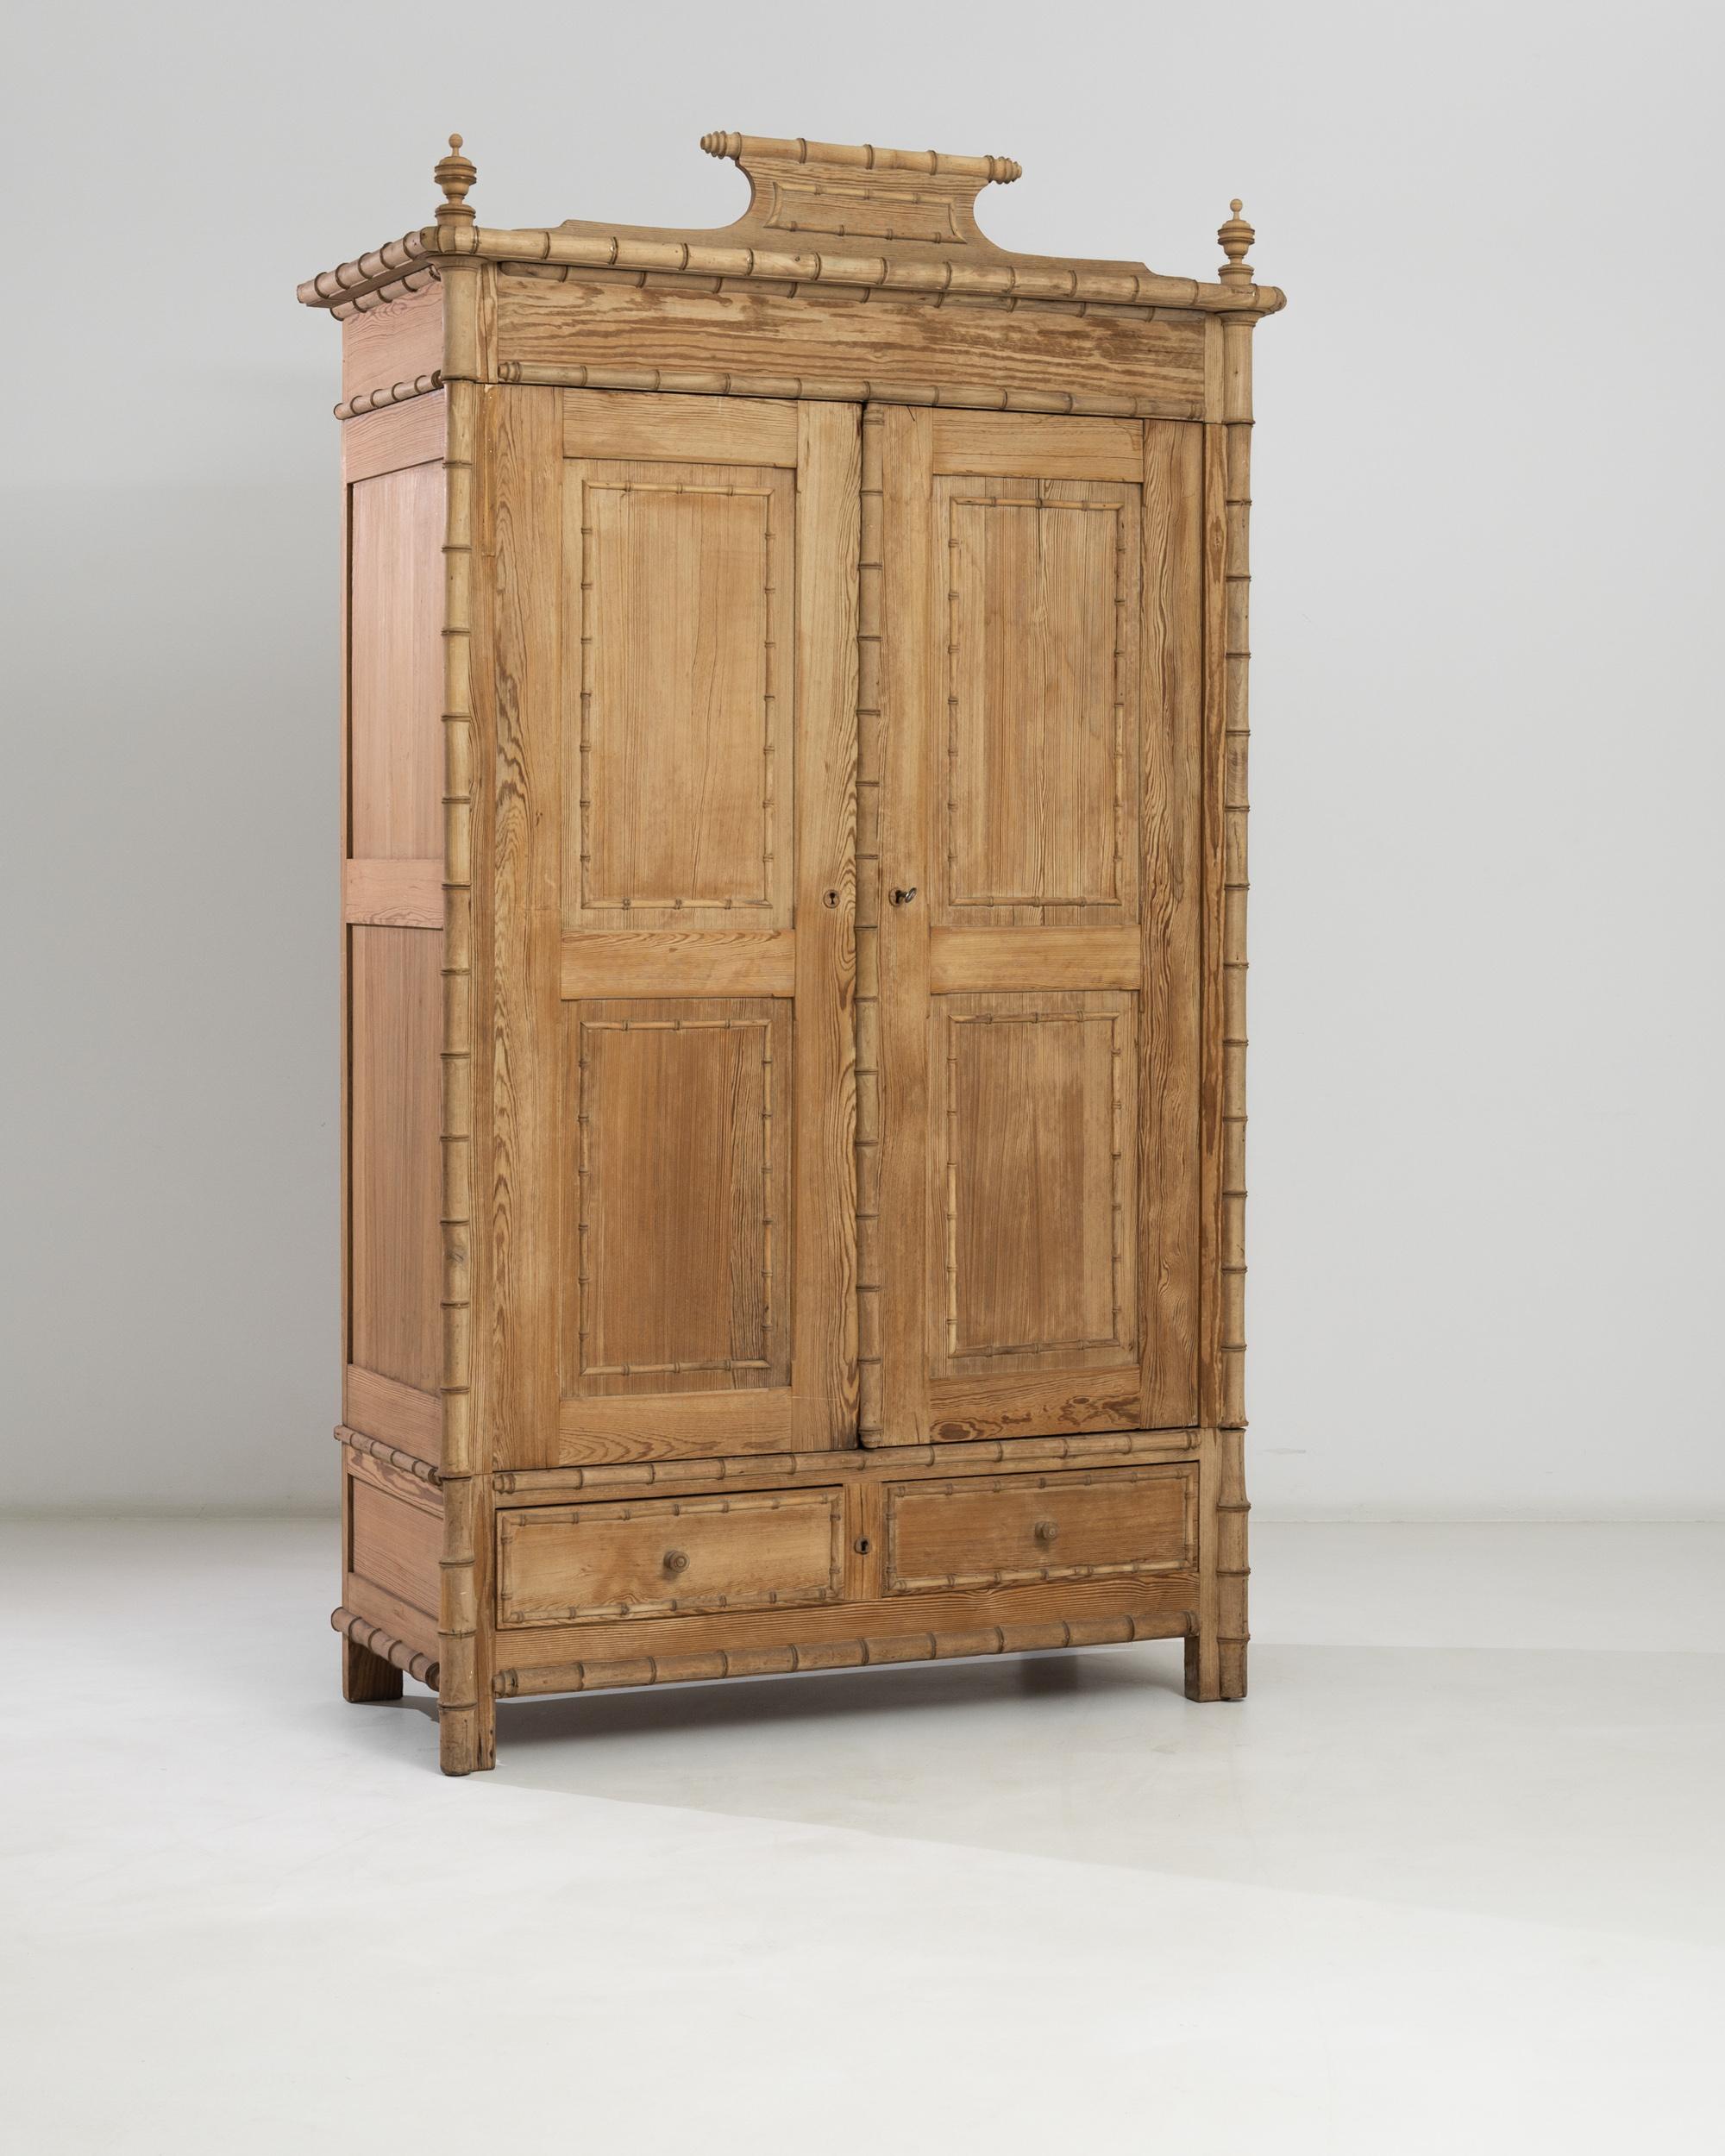 A spacious wooden cabinet made in France circa 1880. Distinct faux bamboo framing follows the contour of the chest, punctuating the strong geometric outlines of the square front feet and molded top adorned with an oriental wooden tiara and